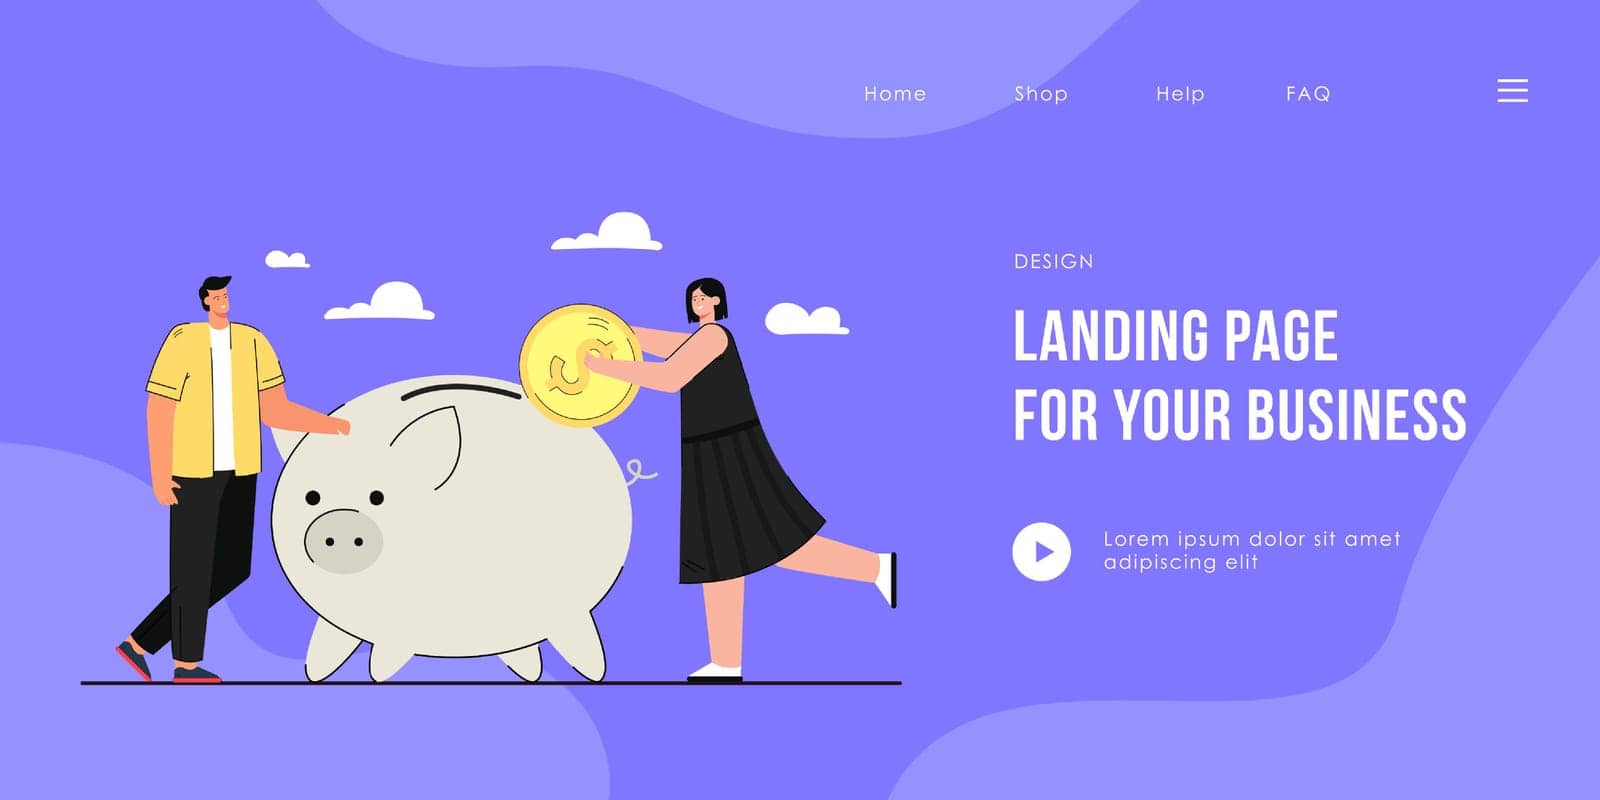 Man and woman saving money. Female character throwing money into piggy bank, man bringing pile of coins. Finance, investing concept for banner, website design, landing web page